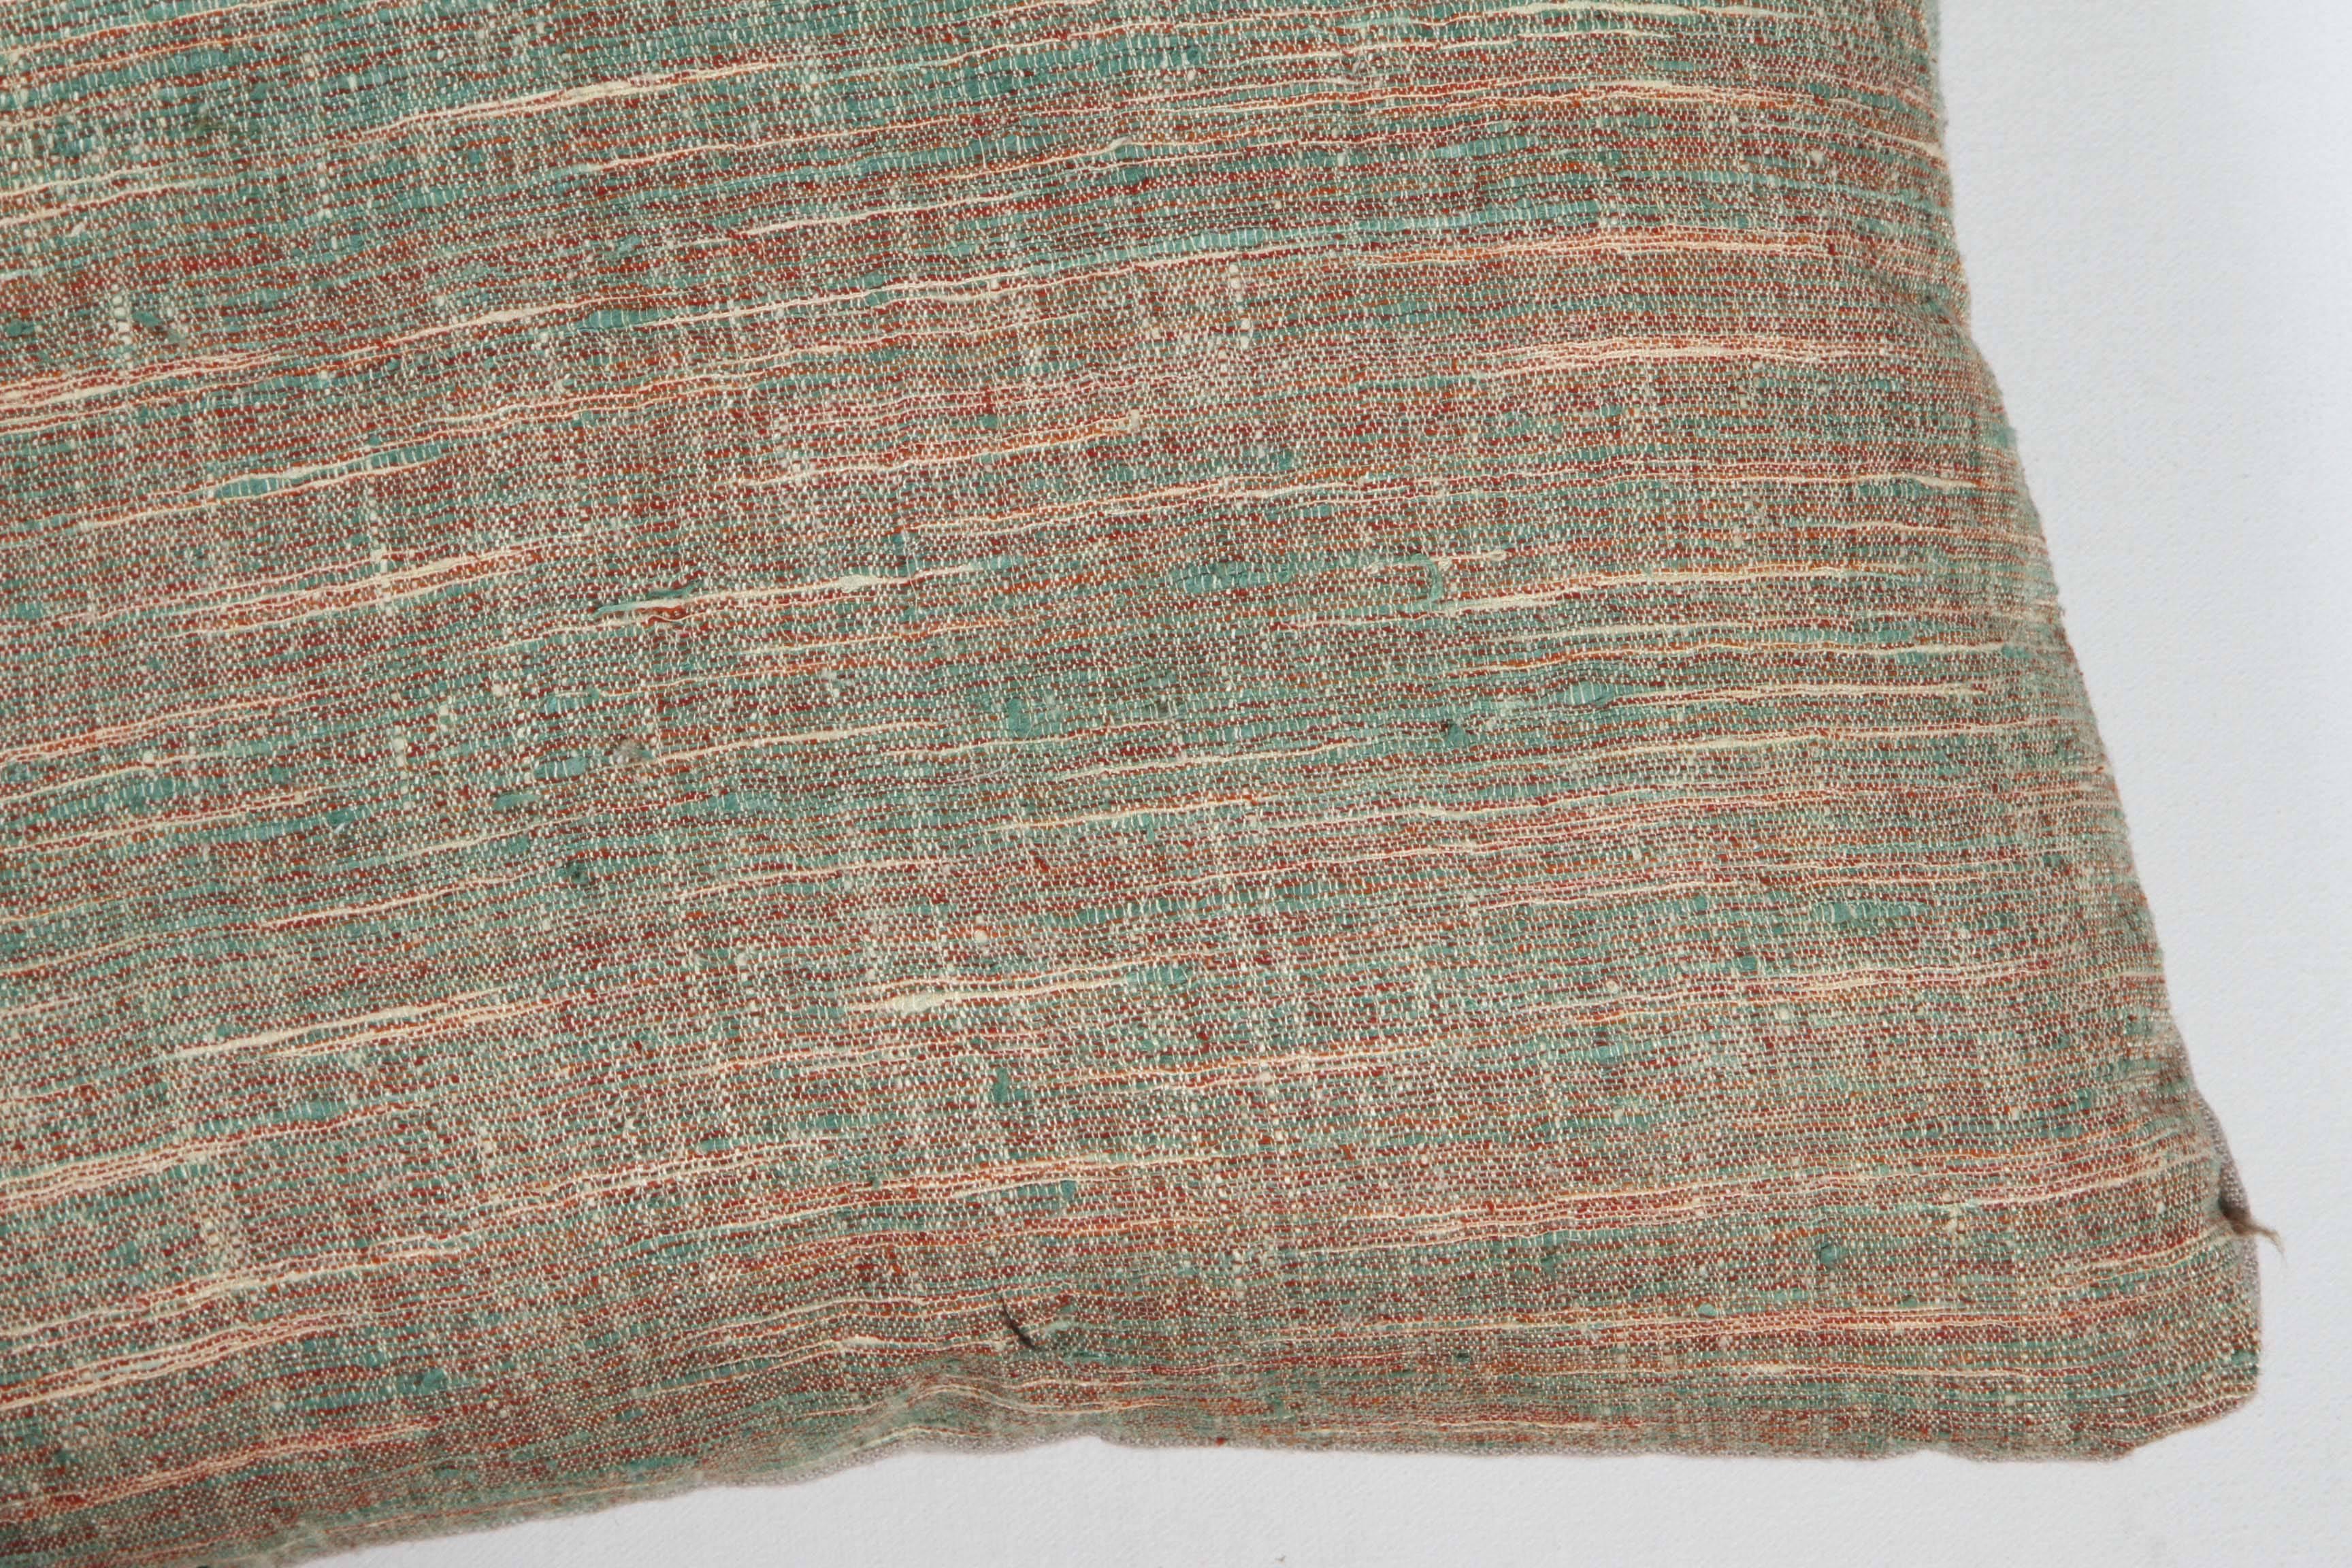 Contemporary Khadi cotton and silk hand woven fabric inspired by Gandhi and the Indian Independence Movement. Still made today and sold in Khadi shops all around India. This green and neutral colored pillow has a natural linen back, invisible zipper